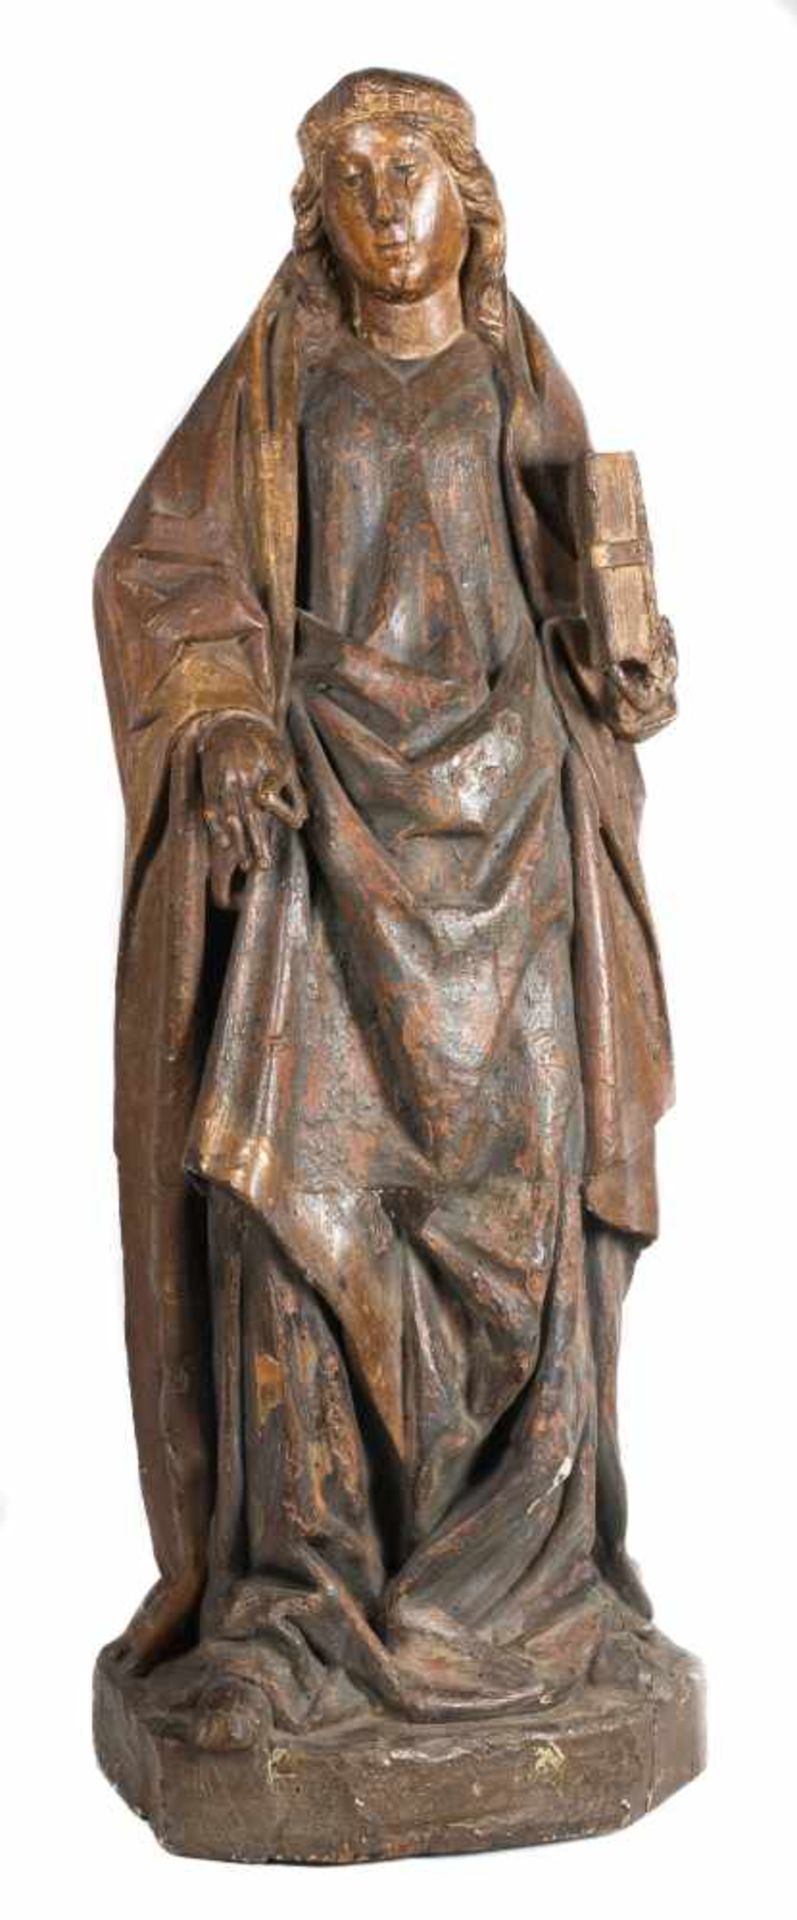 "Saint". Carved, gilded and polychromed wooden sculpture. Hispanic Flemish School. Gothic. Late 15th